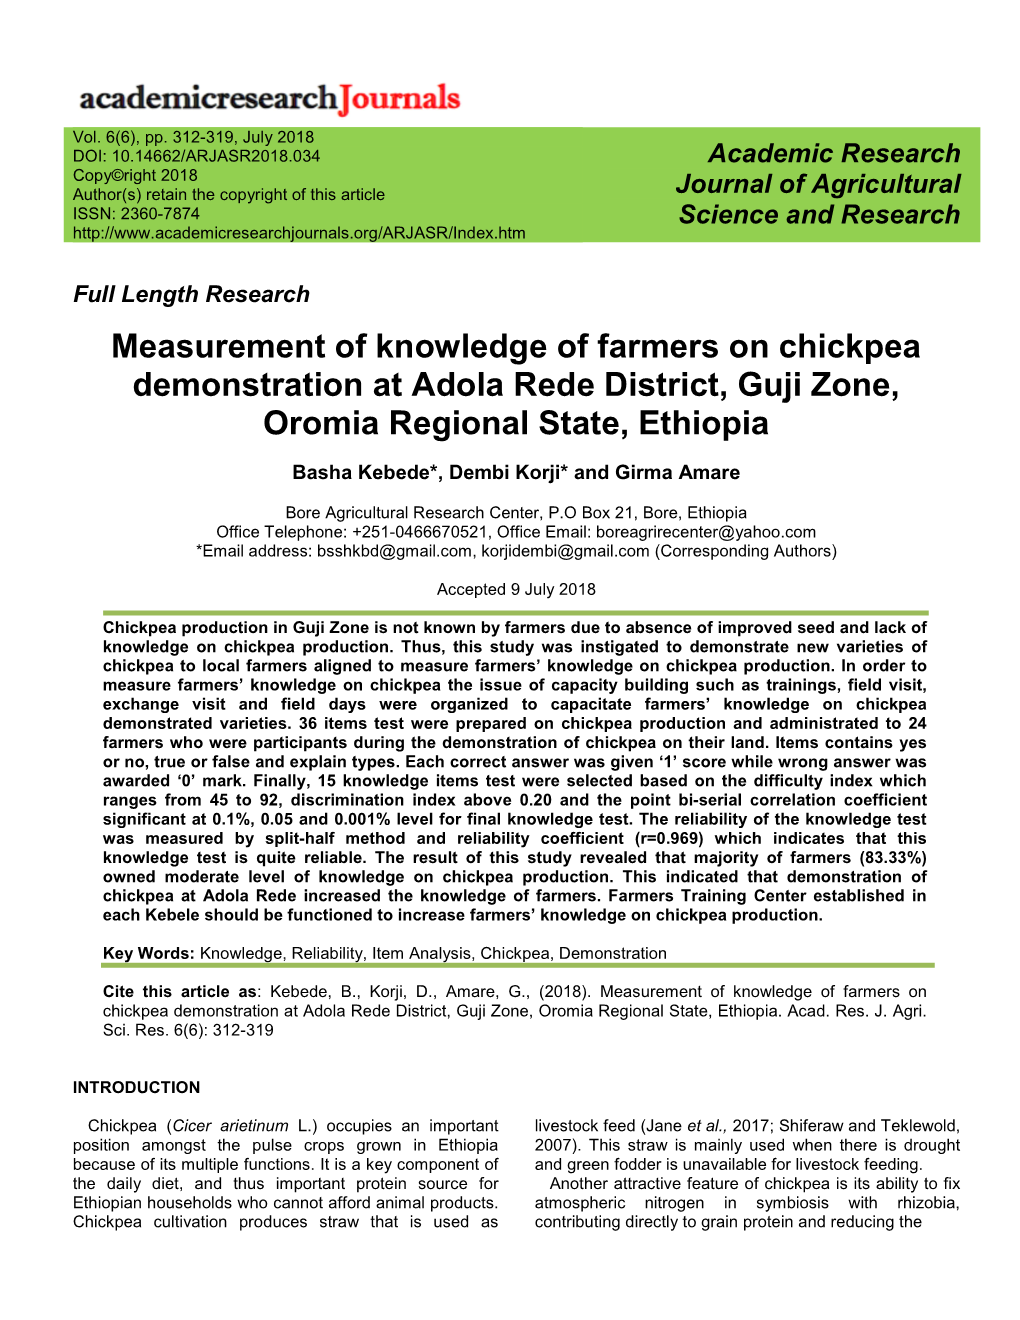 Measurement of Knowledge of Farmers on Chickpea Demonstration at Adola Rede District, Guji Zone, Oromia Regional State, Ethiopia